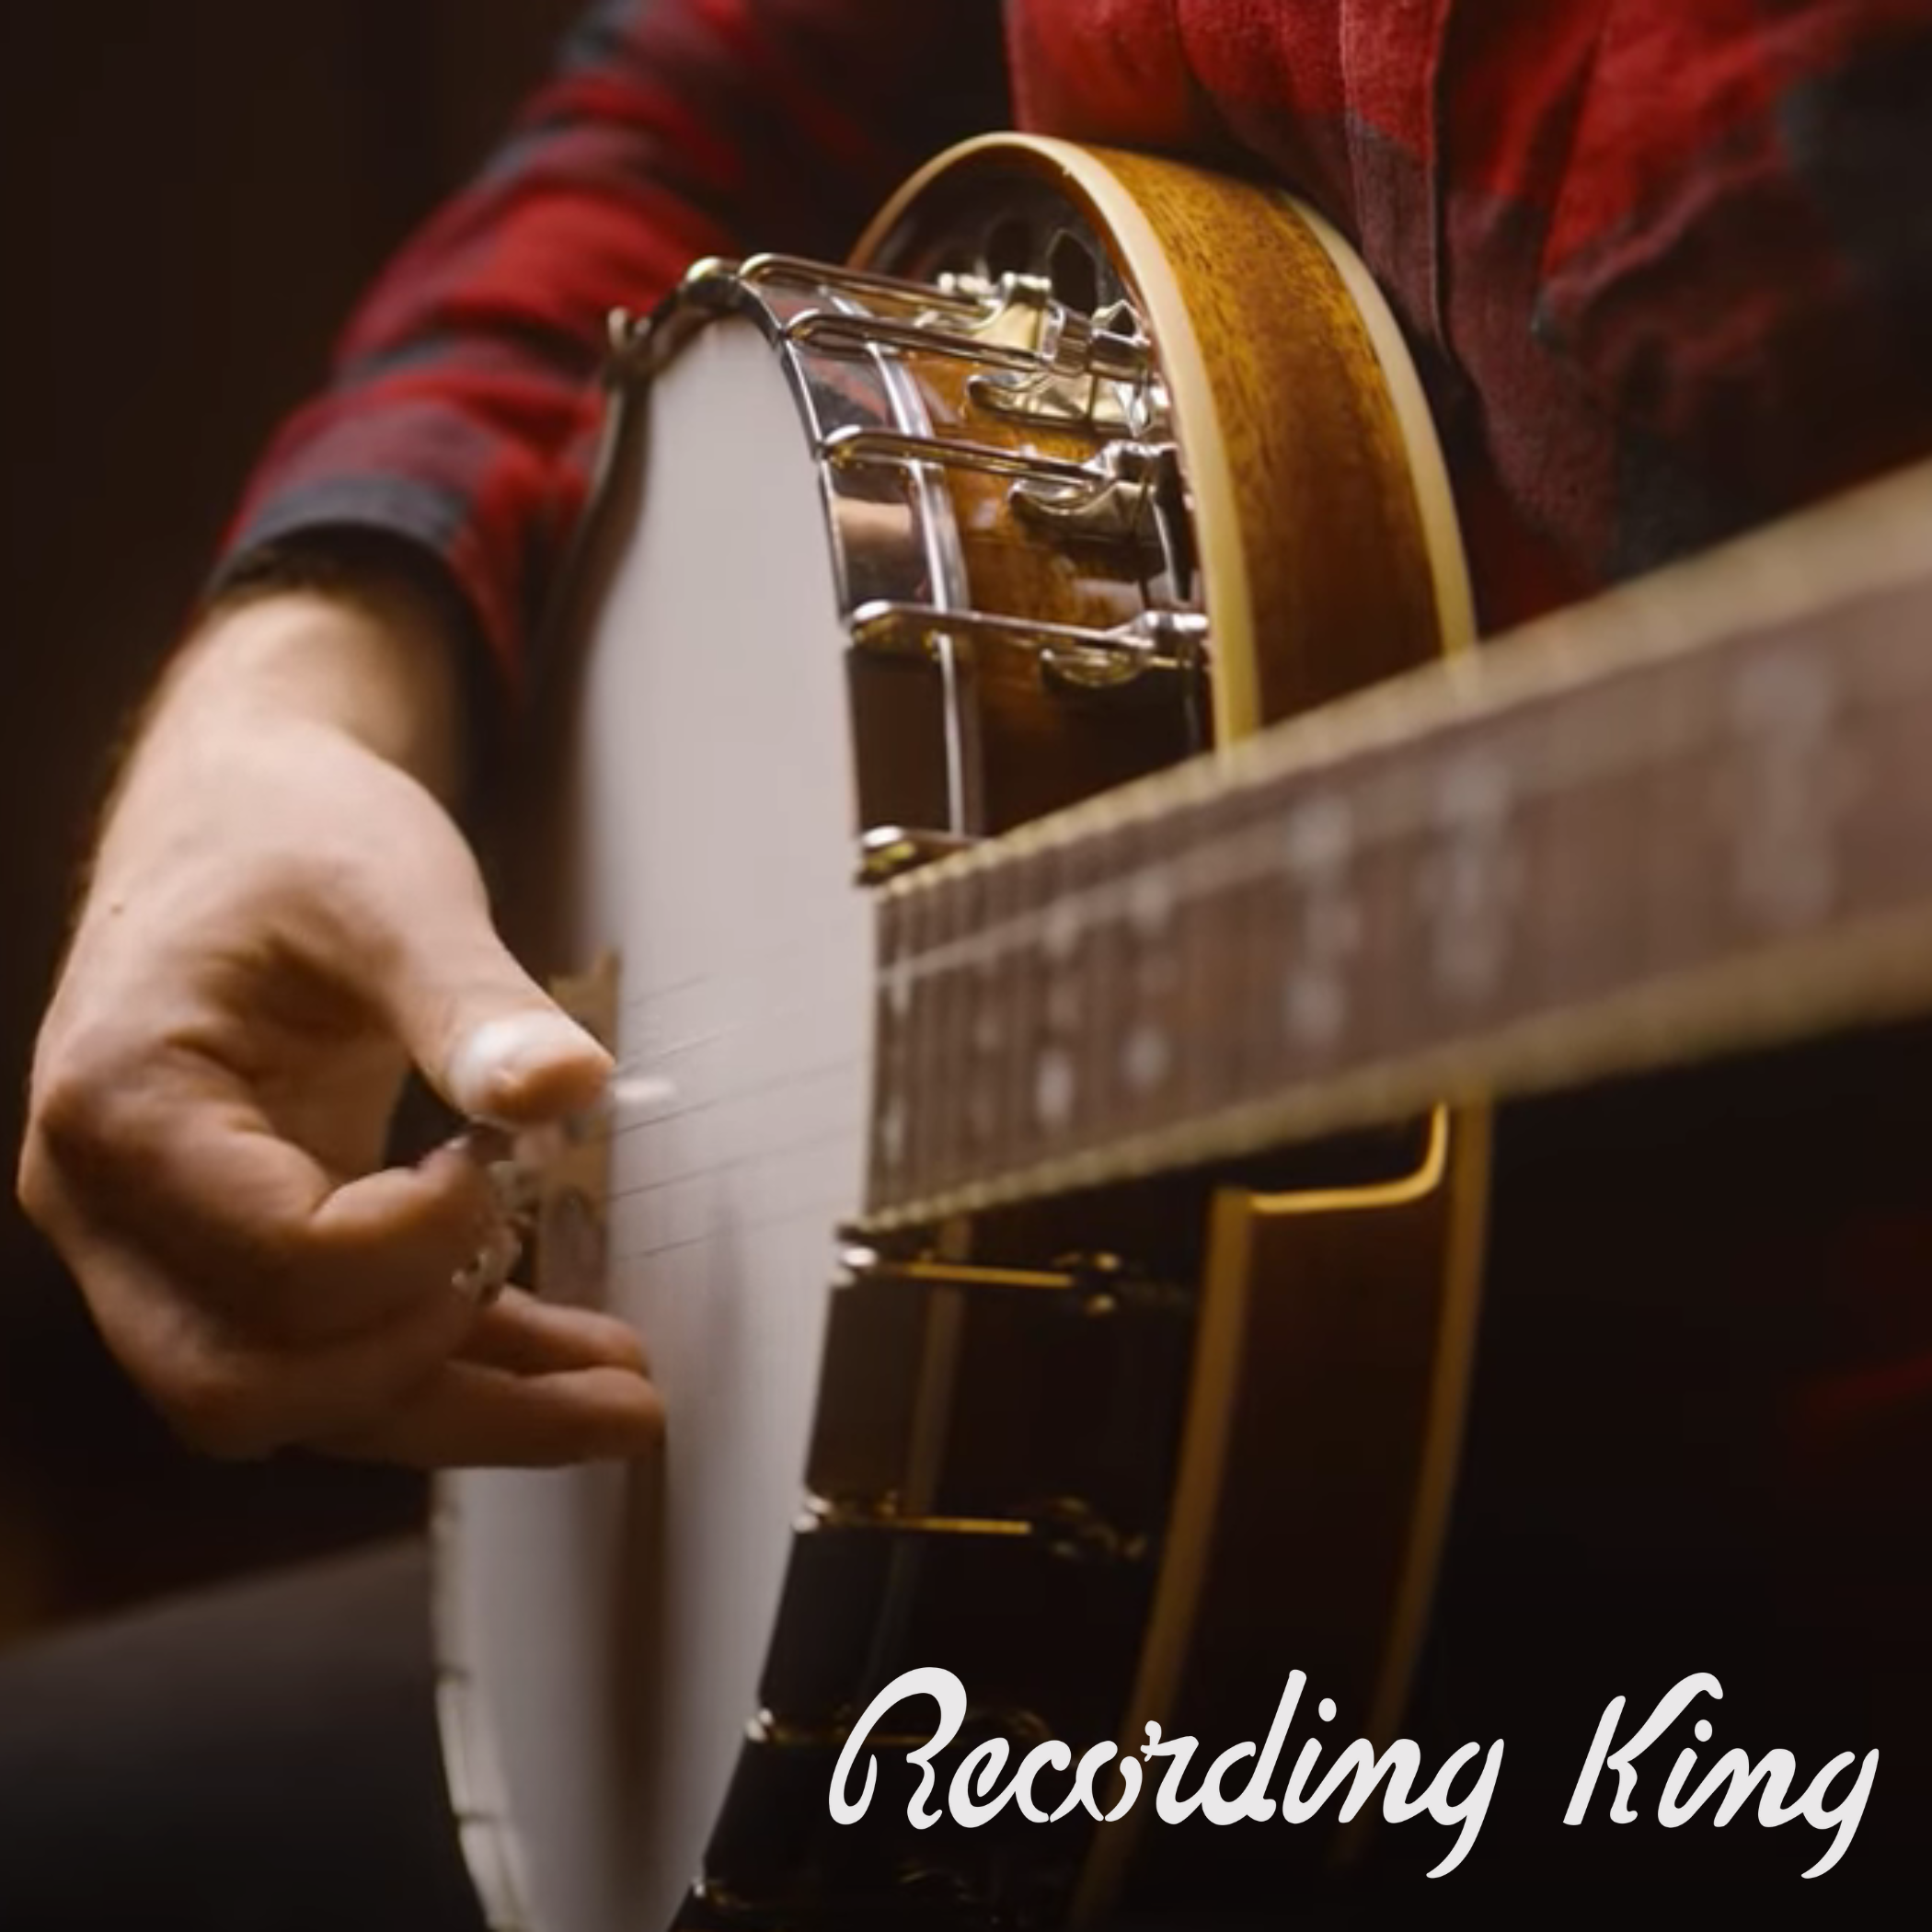 GIVEAWAY: Enter to Win a Recording King Songster Banjo